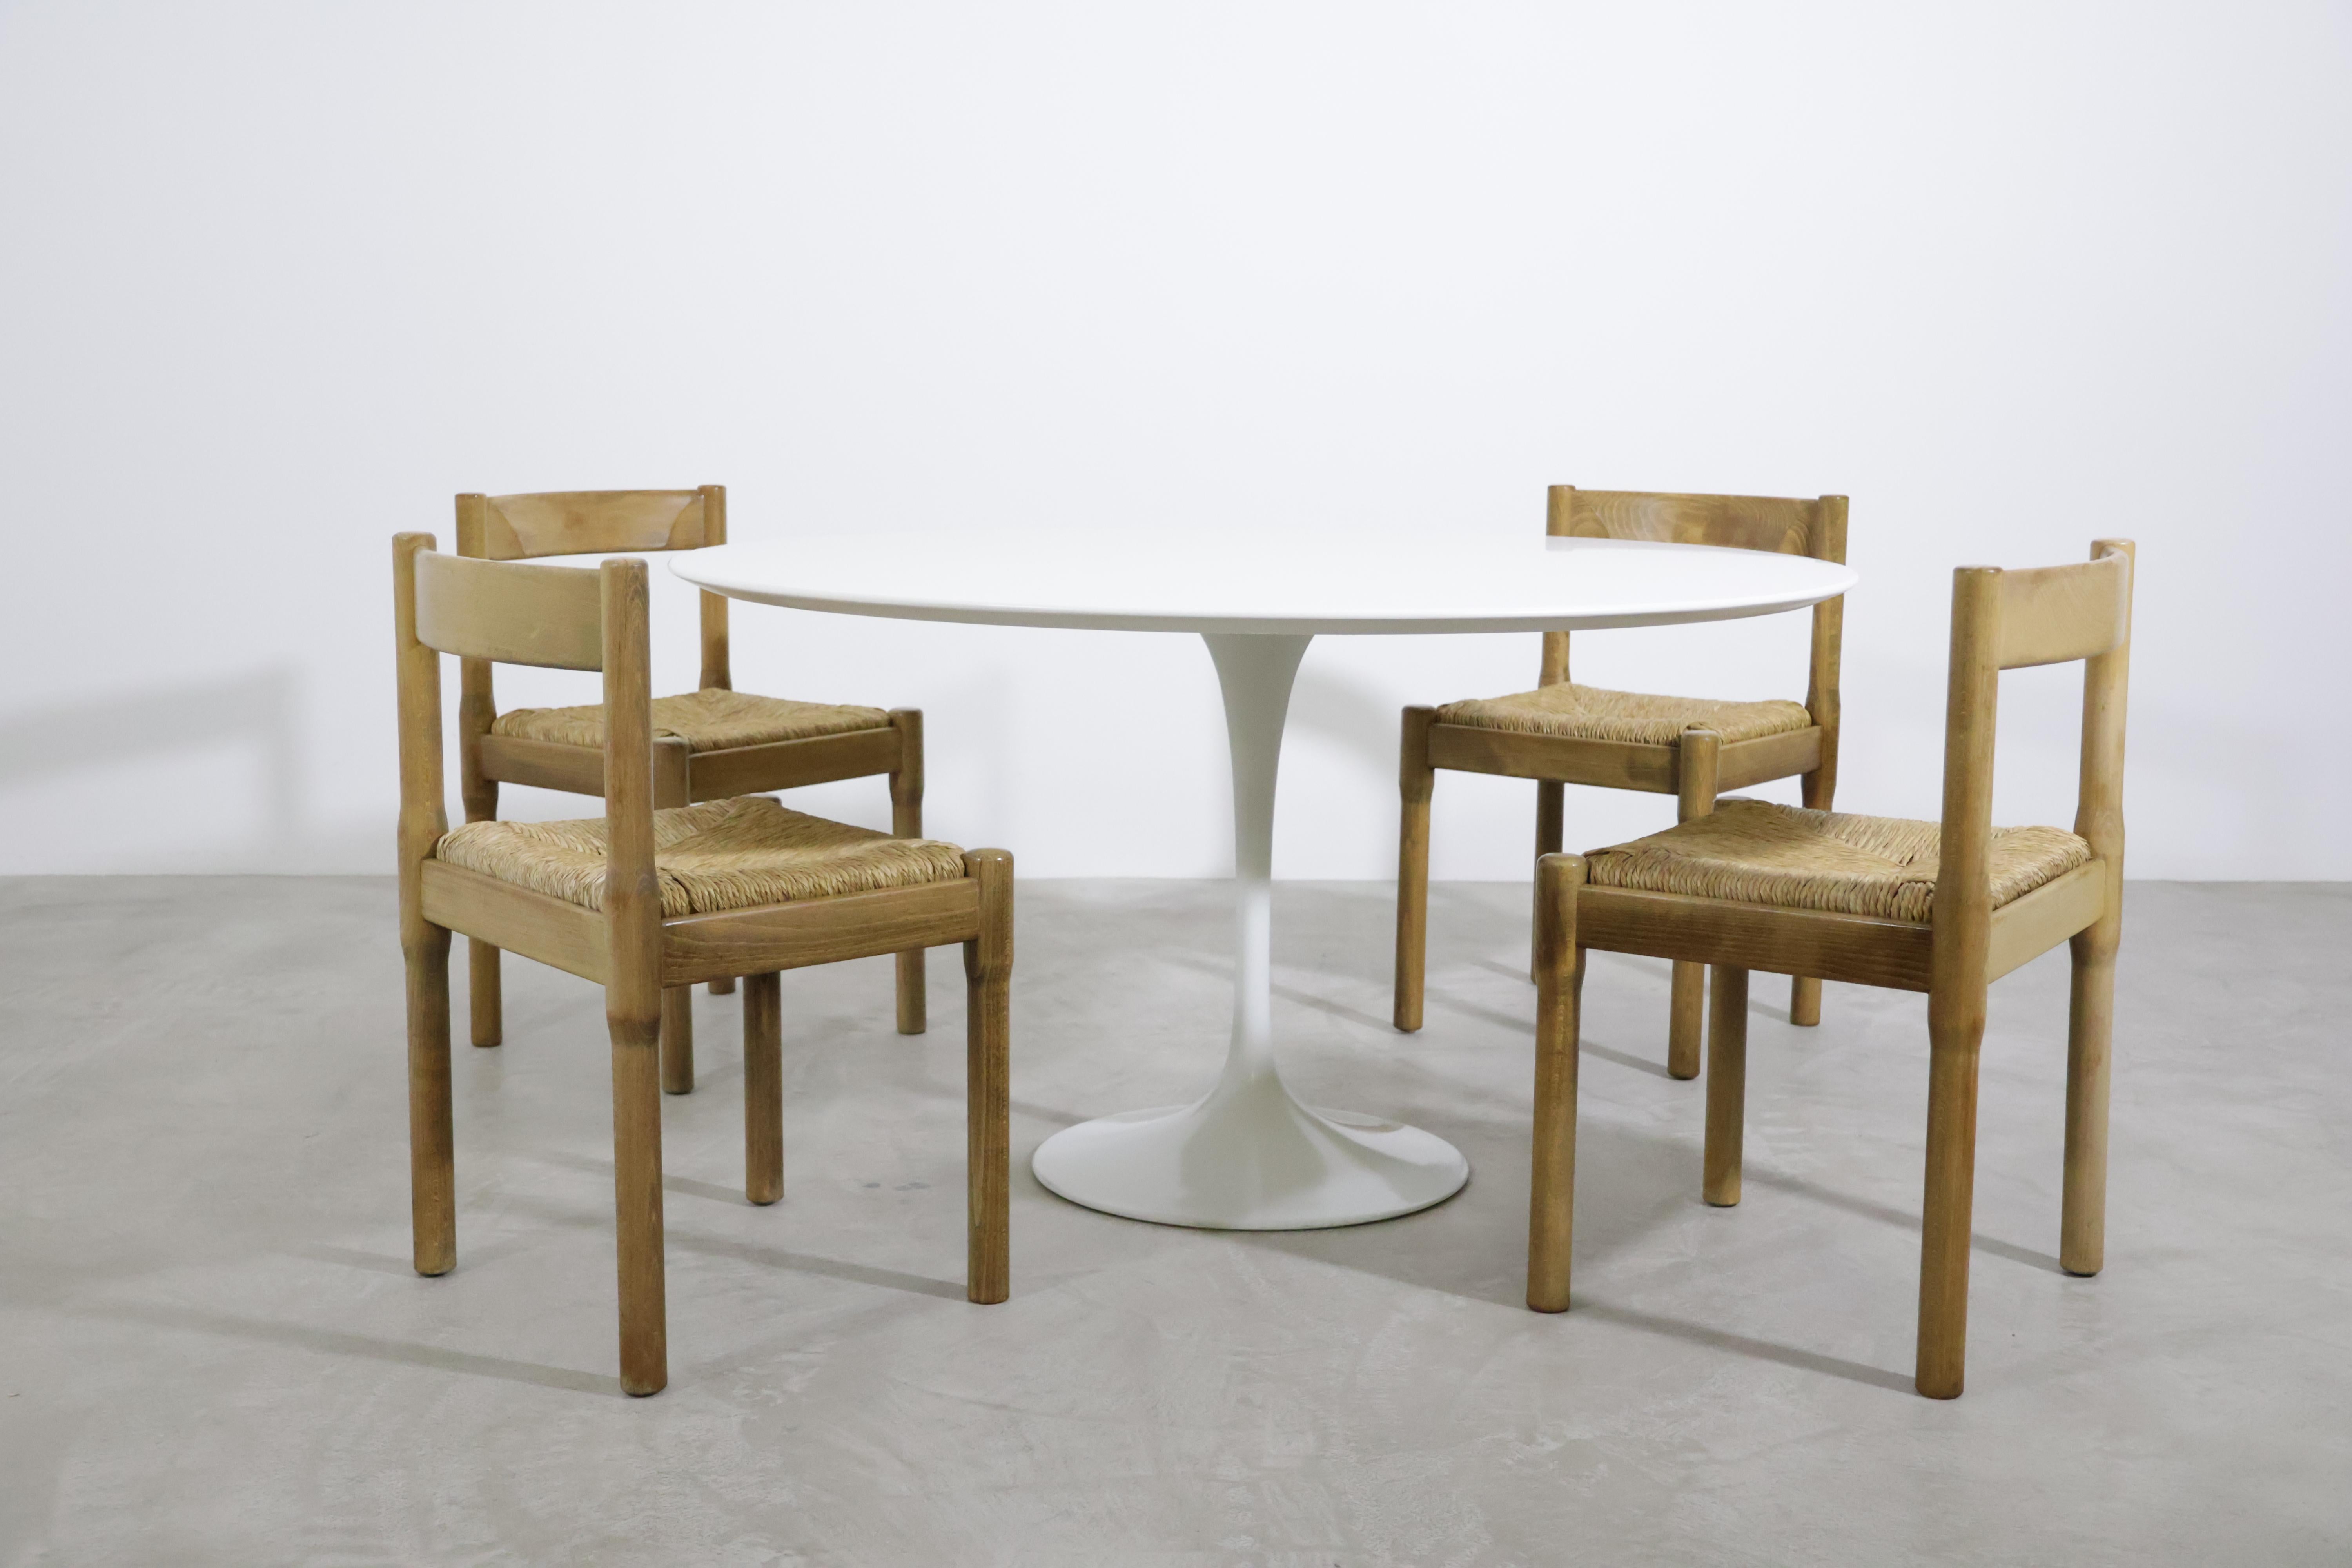 A beautiful set of 12 'Carimate' dining chairs by Vico Magistretti for Mario Luigi Comi/Italy in the 60s!
The 'Carimate' chair is one of Vico Magistretti's most famous chair and for him, rather unsual, as his furniture is better known for the